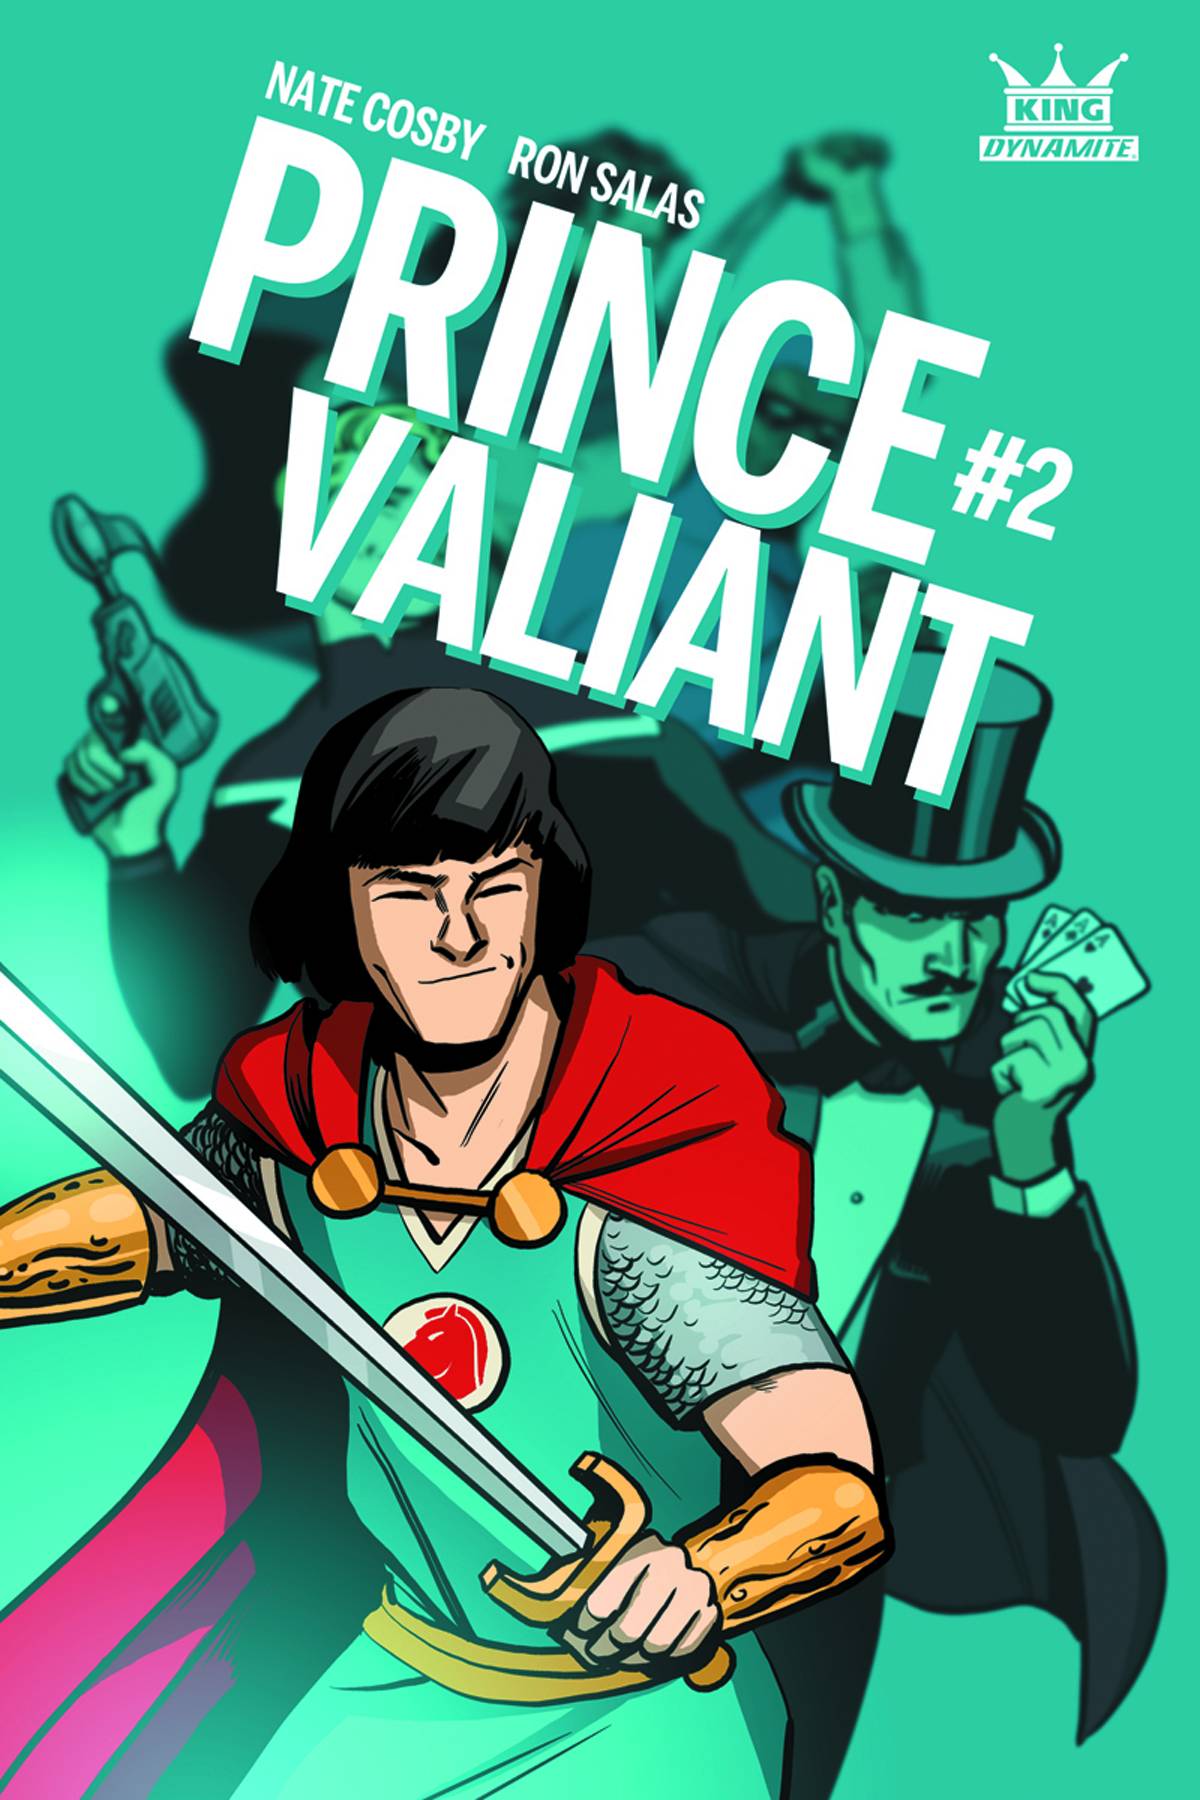 The Valiant download the new for android